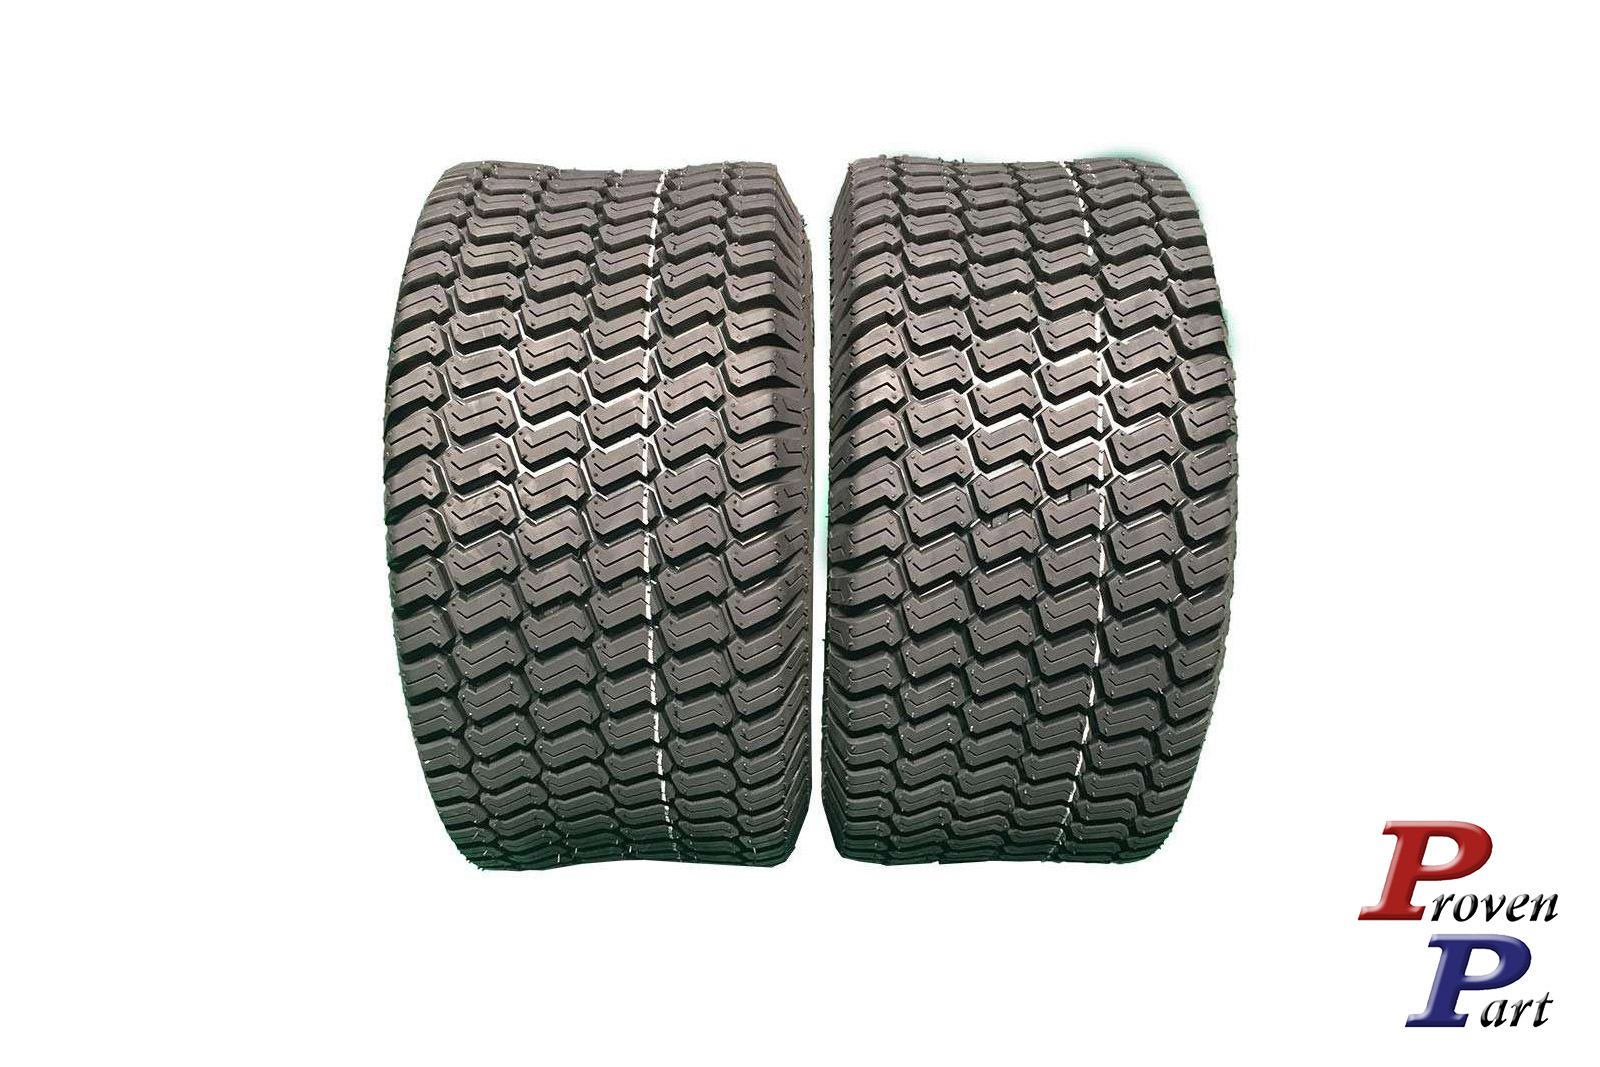 2 lawn mower tubeless tires 4 ply 23x9.5-12 replace Scag 484466